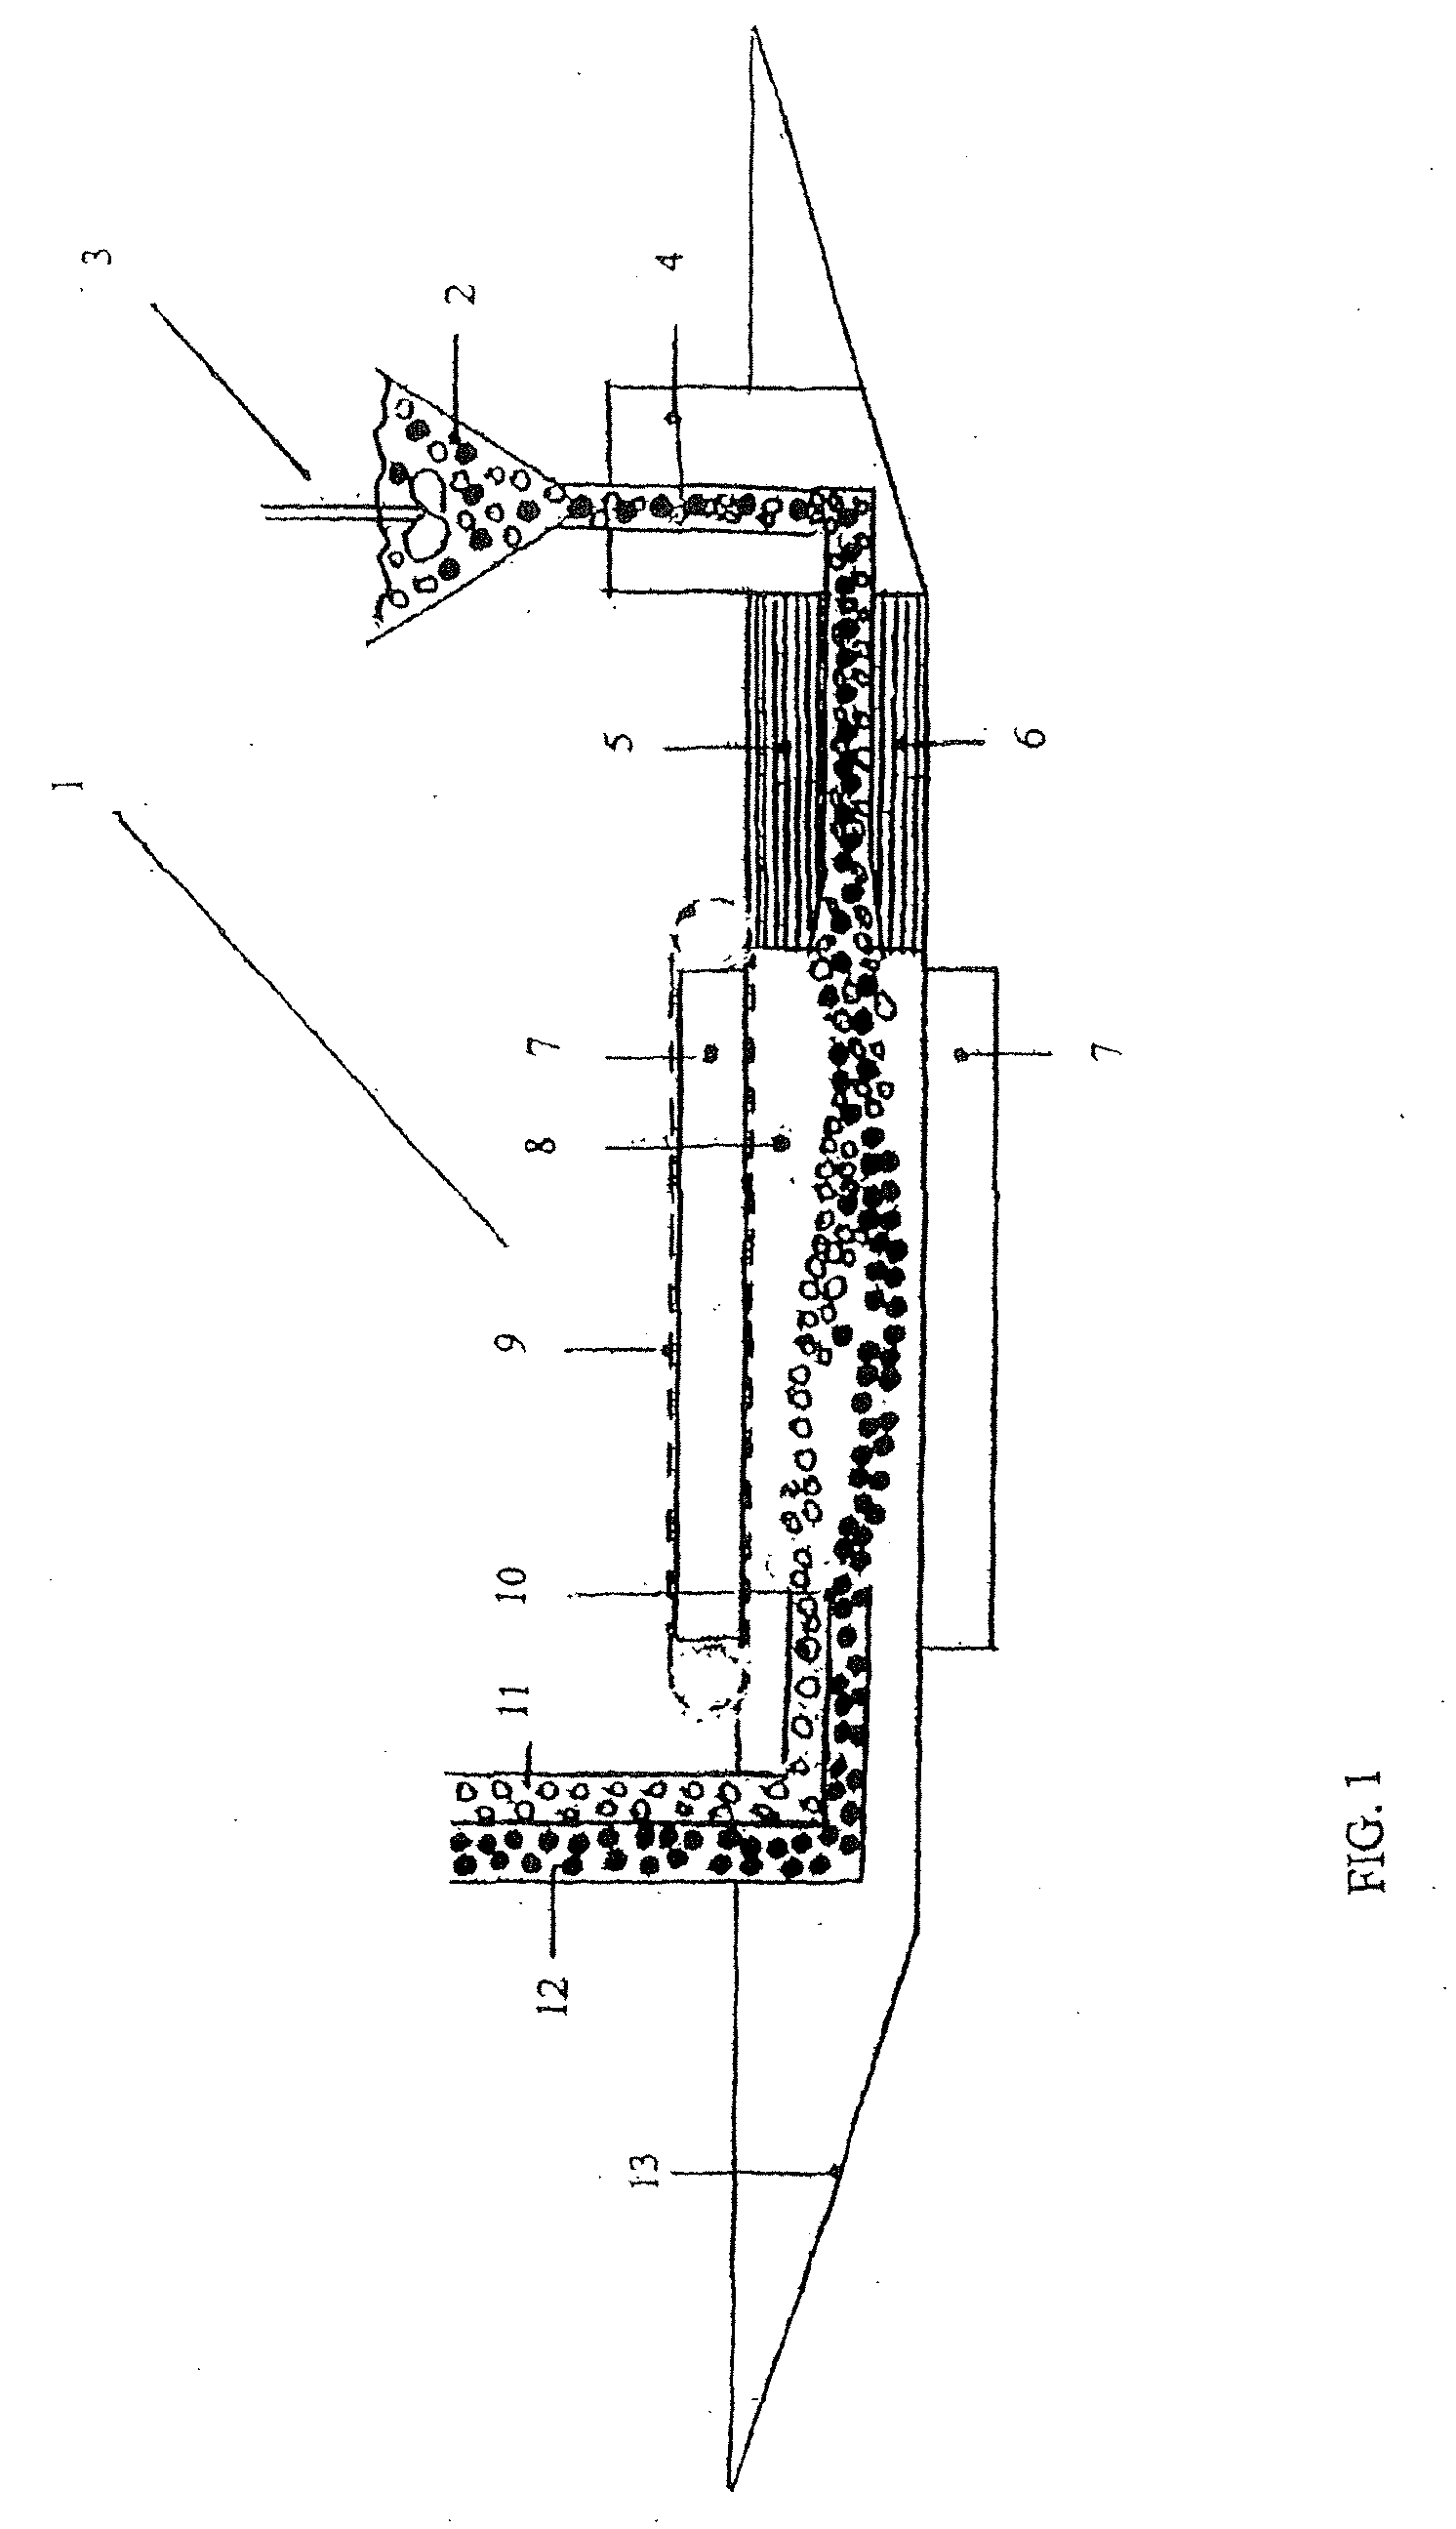 Method and Apparatus for Separating Parts, in Particular Seeds, Having Different Densities